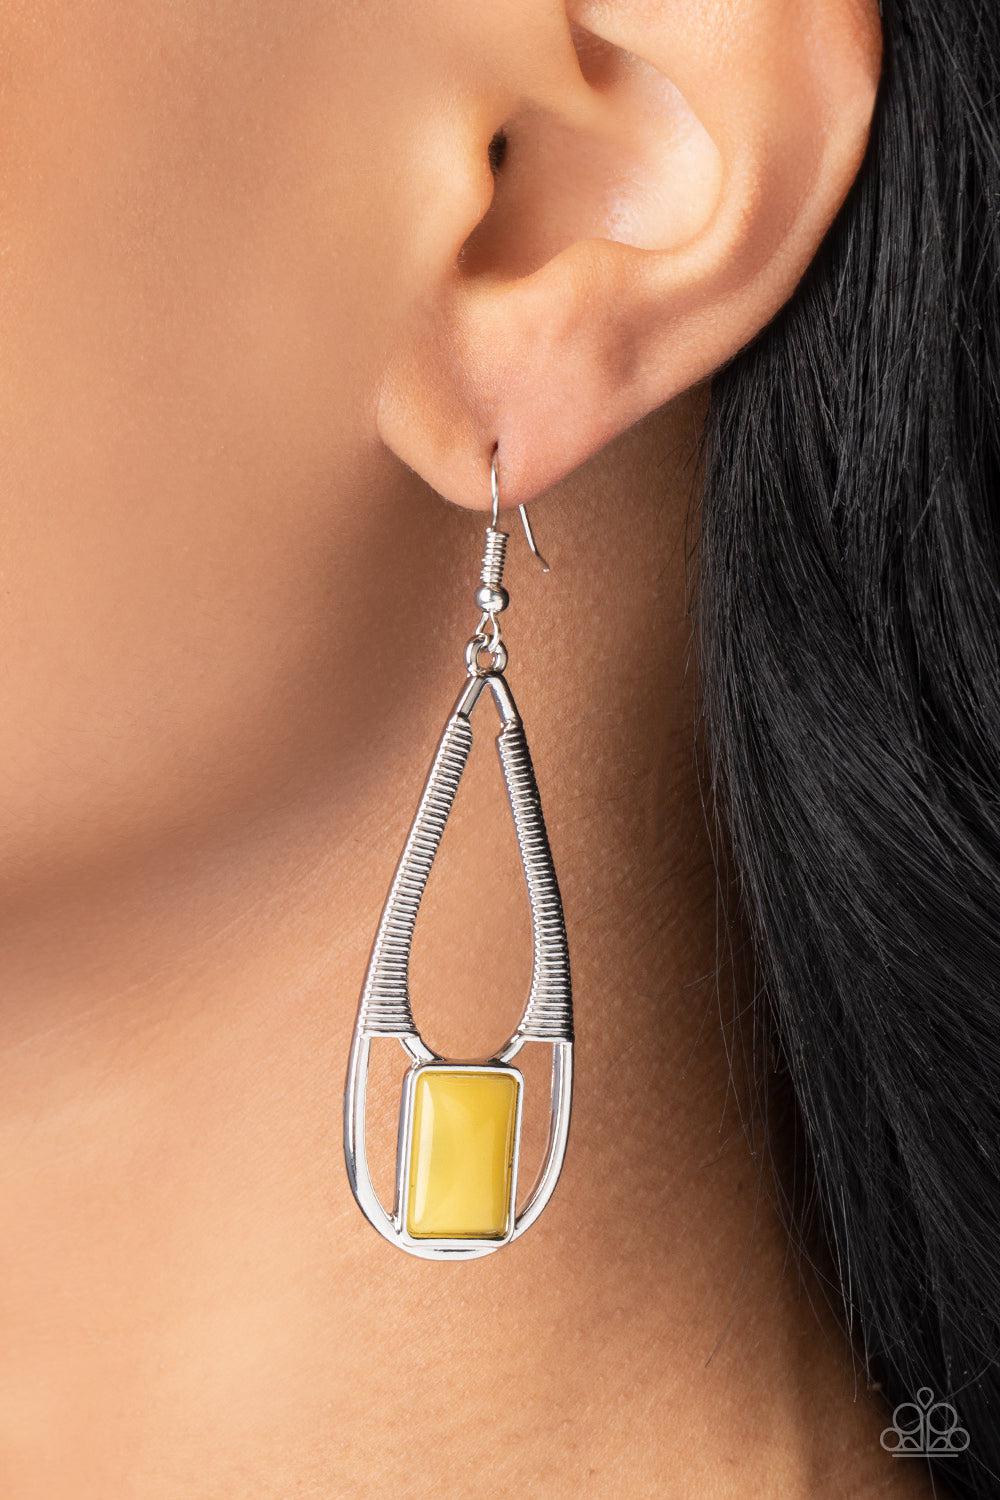 Adventure Story Yellow Earrings - Paparazzi Accessories-on model - CarasShop.com - $5 Jewelry by Cara Jewels